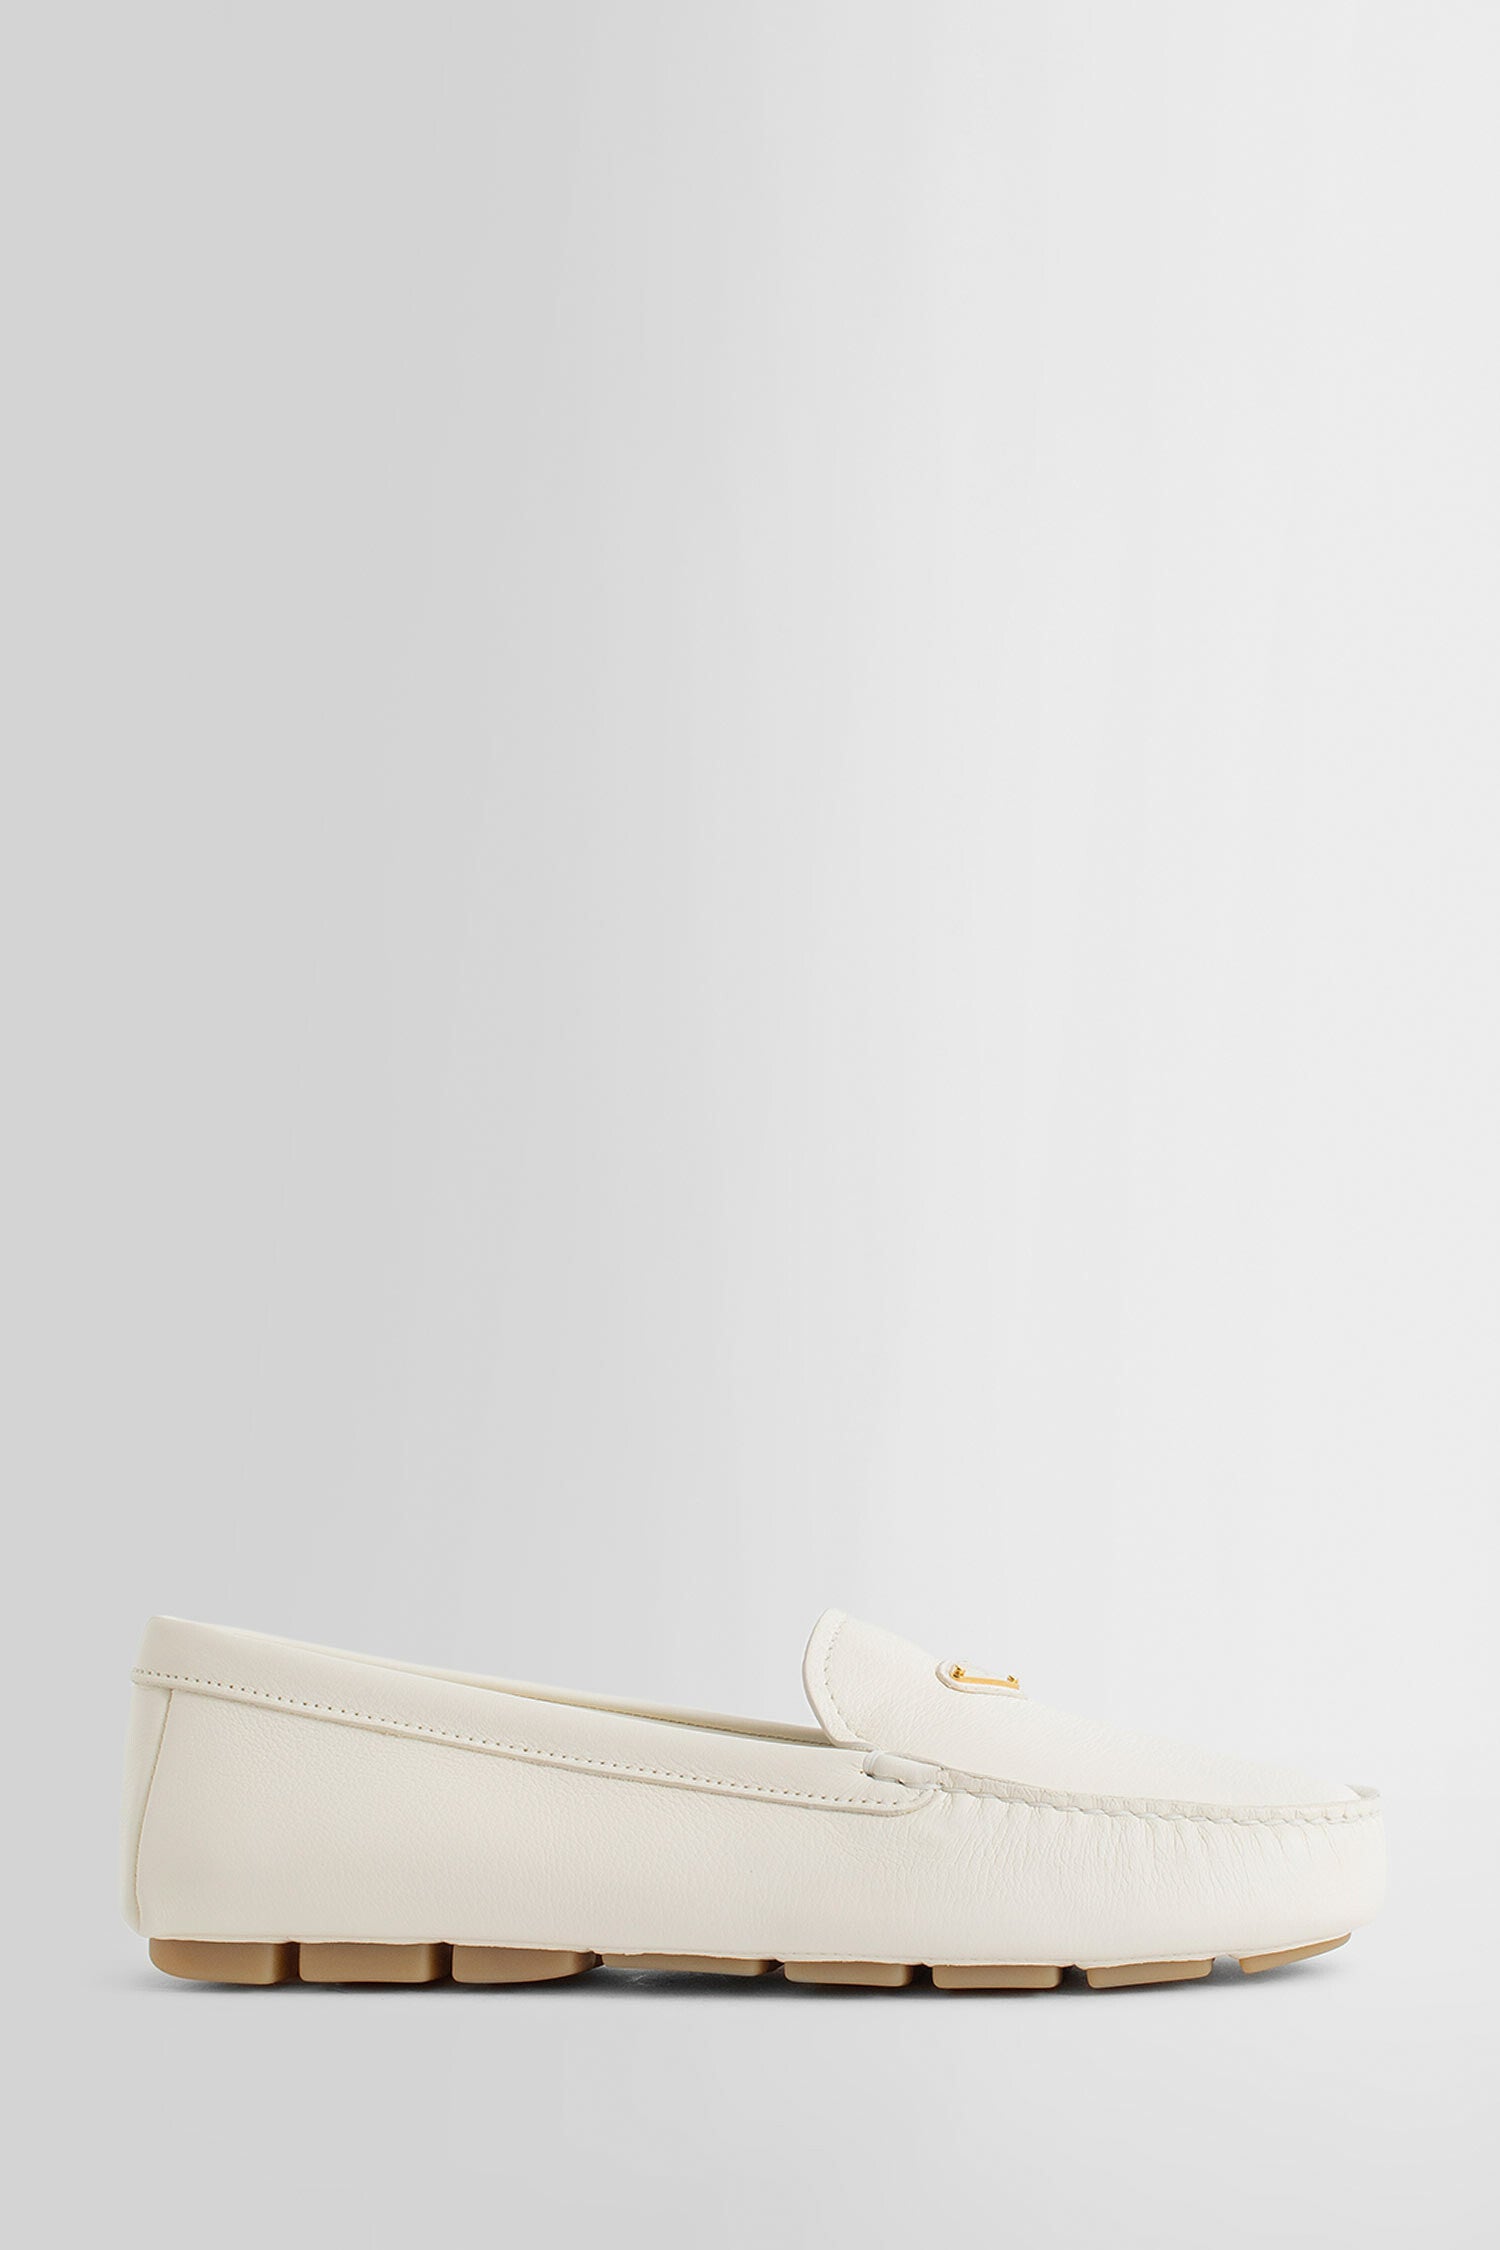 PRADA WOMAN OFF-WHITE LOAFERS & FLATS